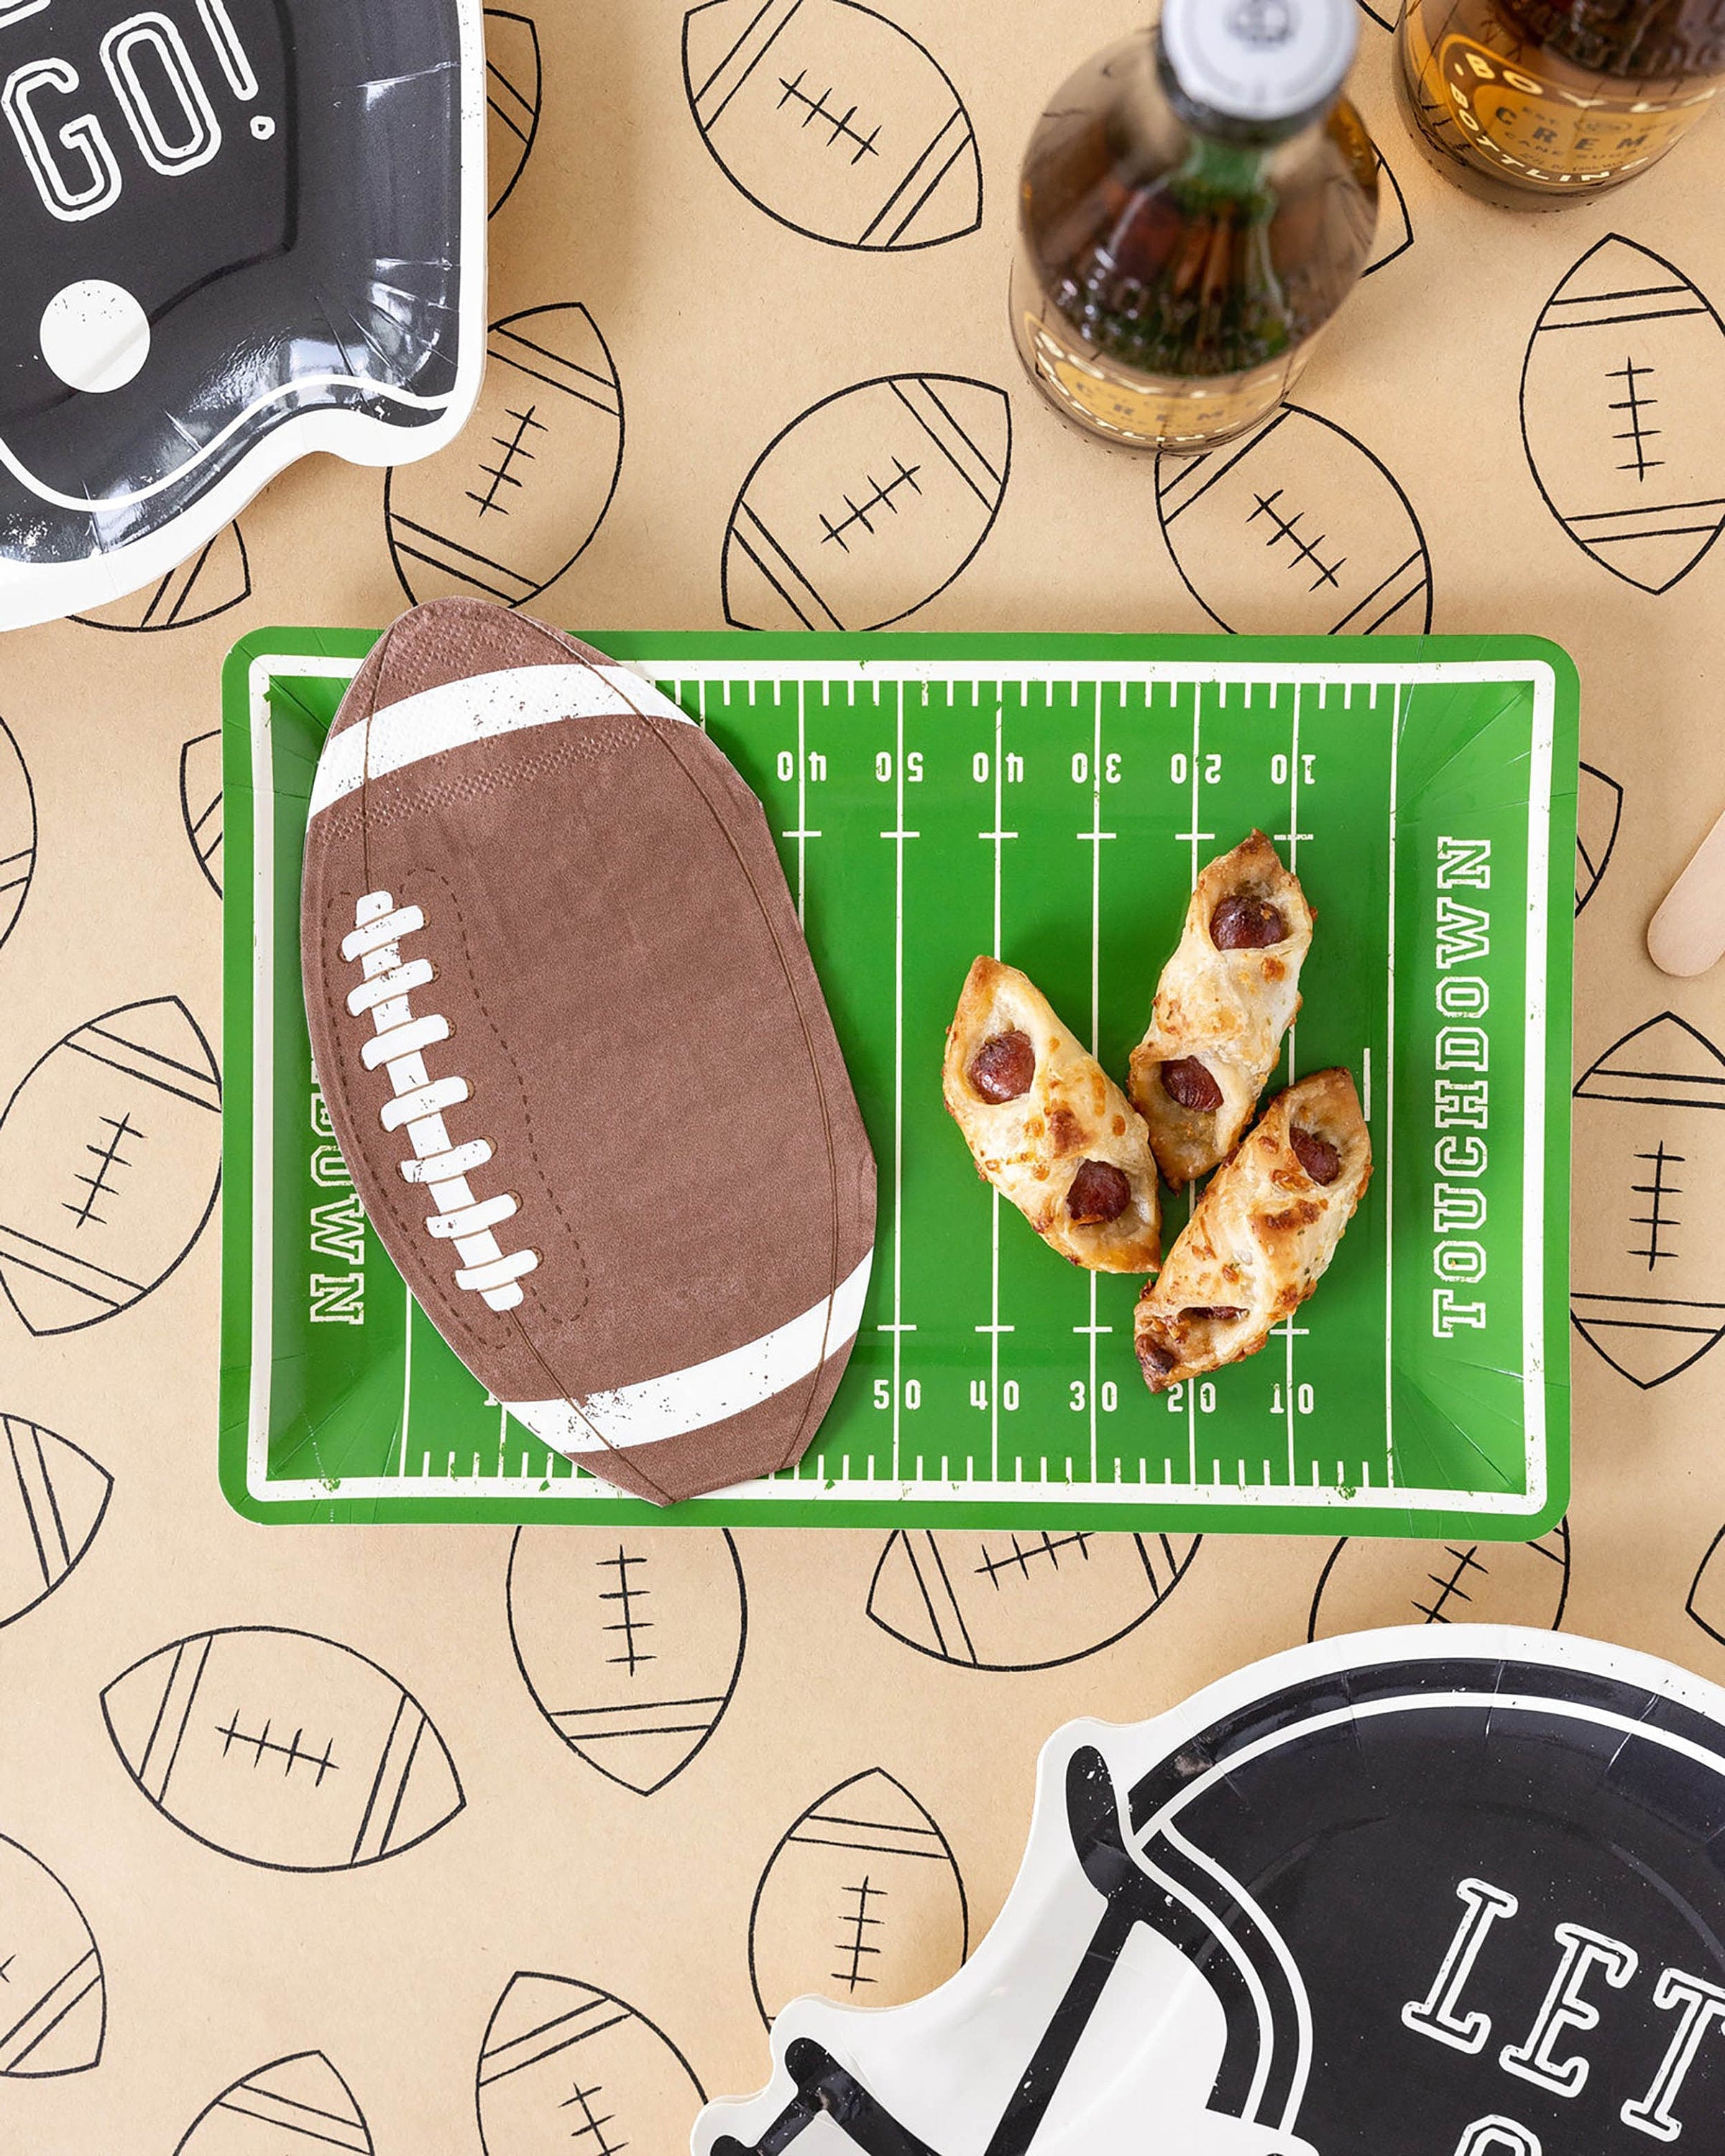 Football Table Runner - Football Birthday Party - Football Party - Football Table Decor - Football Party Supplies - Paper Table Runner